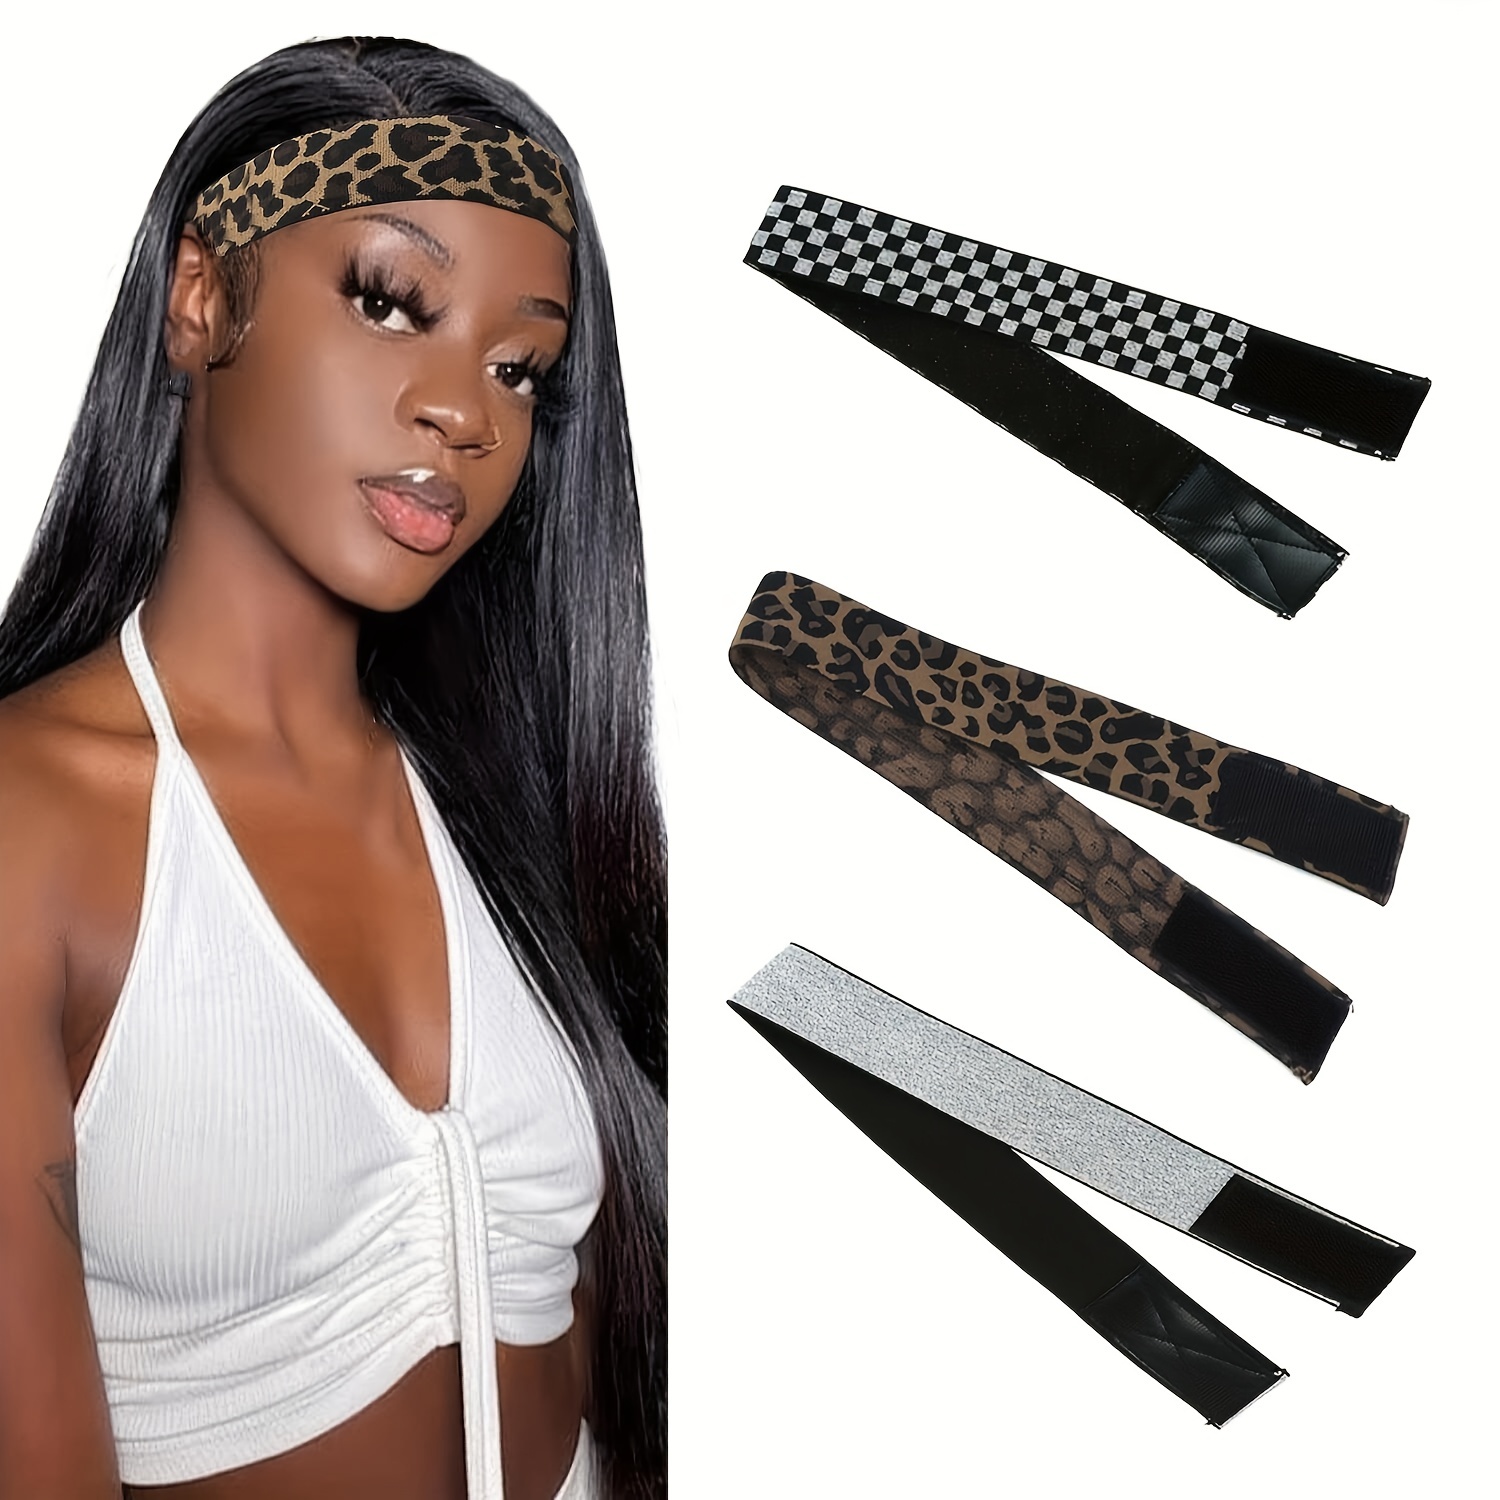 1PC/5PC Elastic Hair Lace Melting Band Elastic Bands for Wig Edges Lace Frontal Melt Band for Wigs, Toupees, Hair Pieces Edge Laying Band for Women